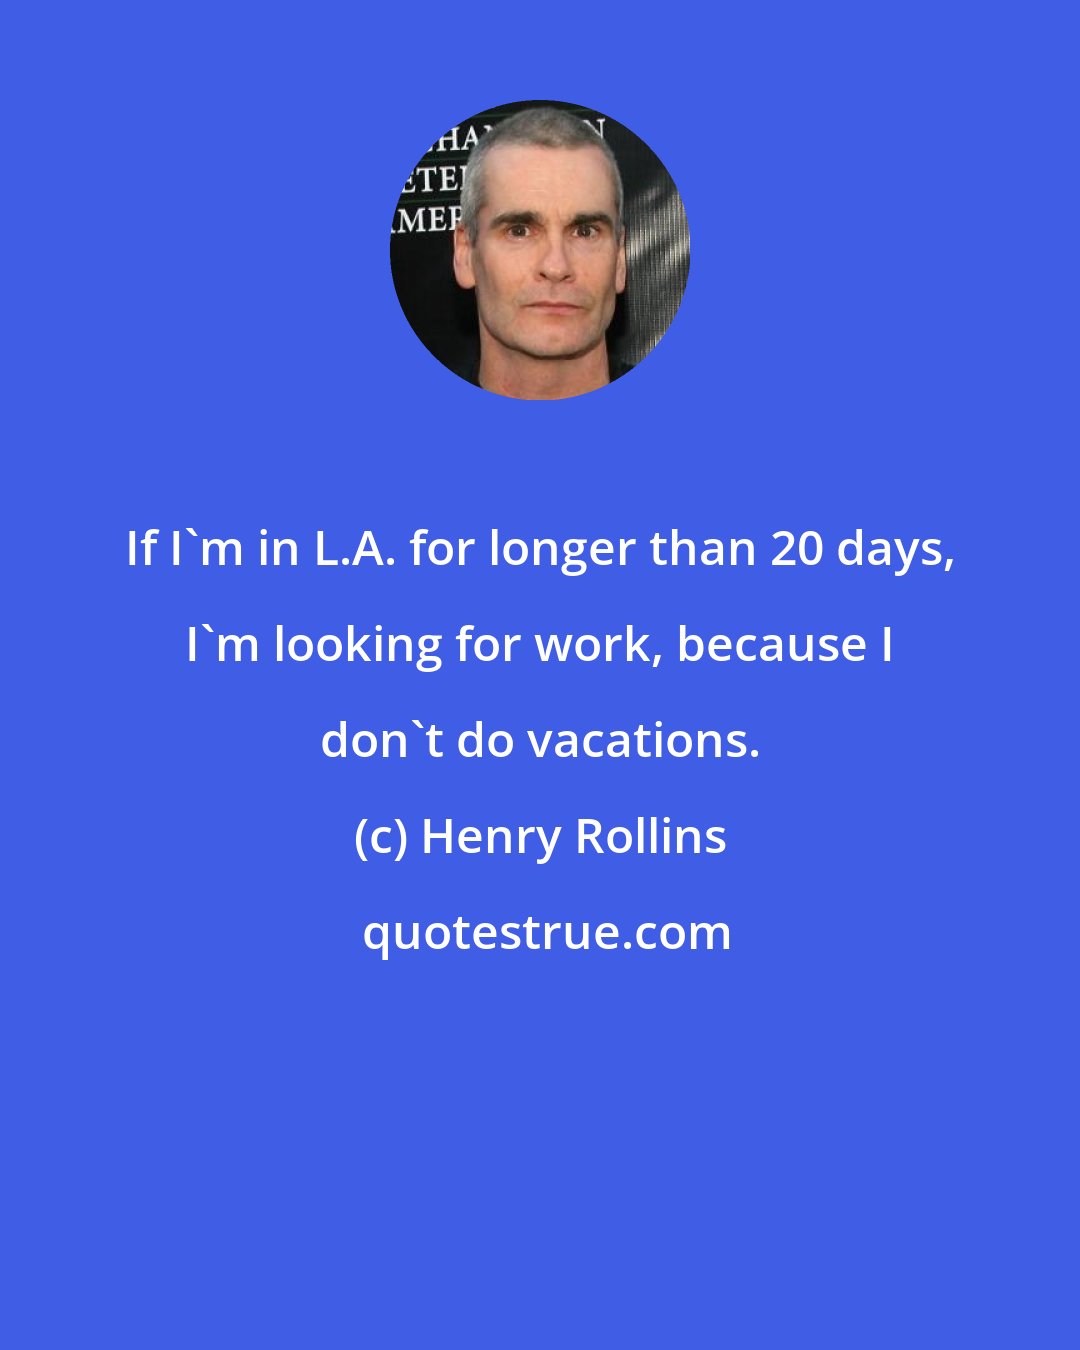 Henry Rollins: If I'm in L.A. for longer than 20 days, I'm looking for work, because I don't do vacations.